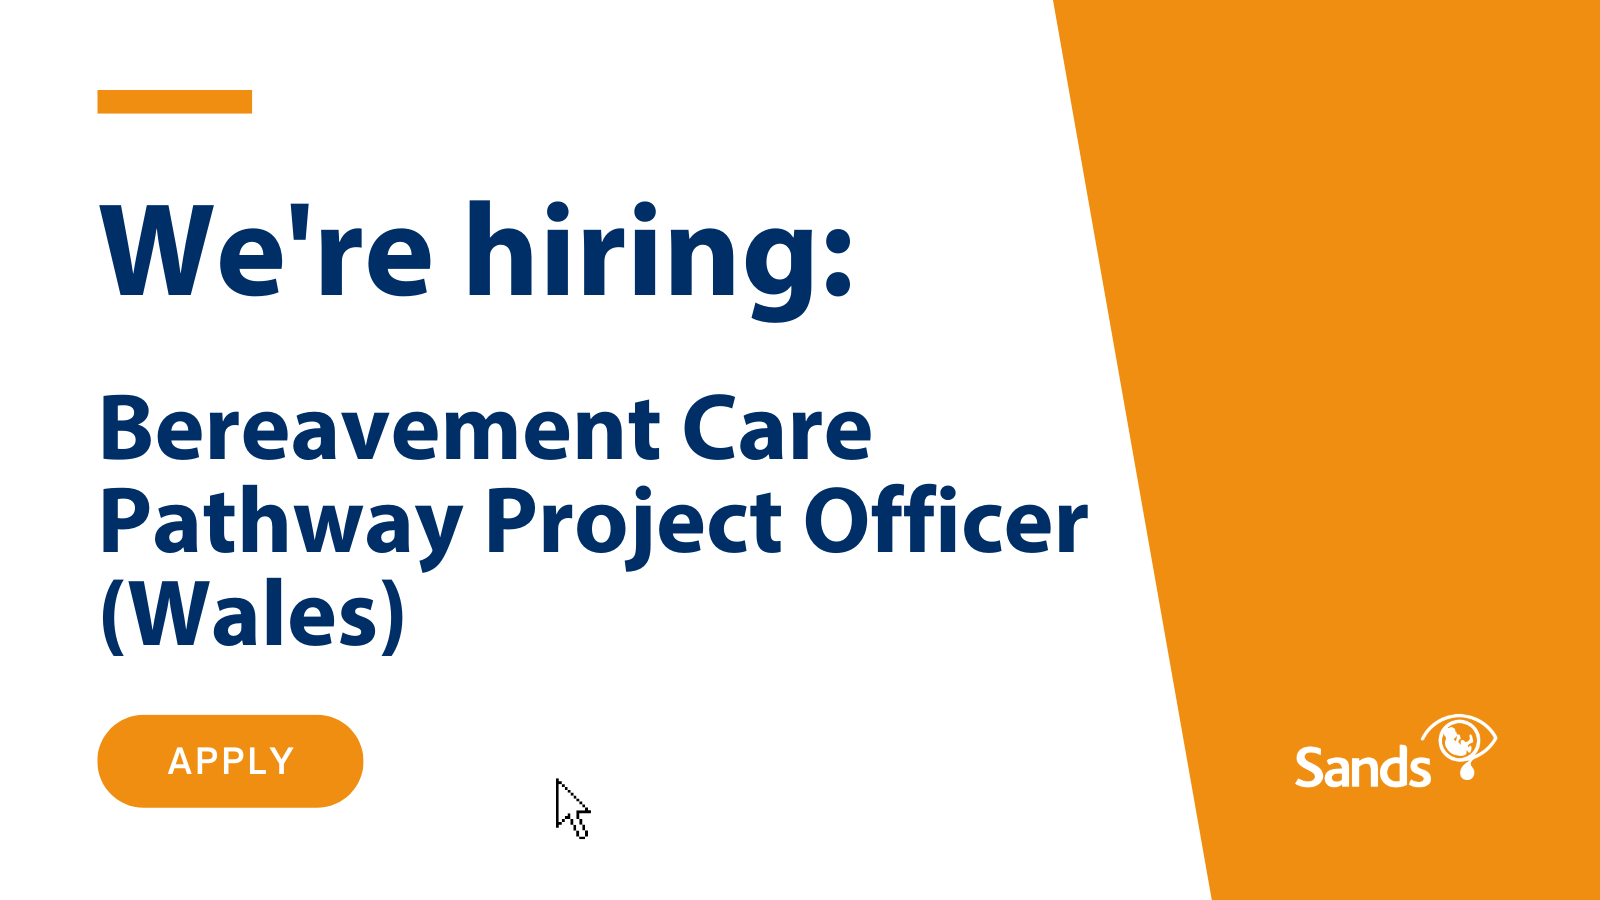 We are hiring Bereavement Care Pathway Project Officer (Wales)